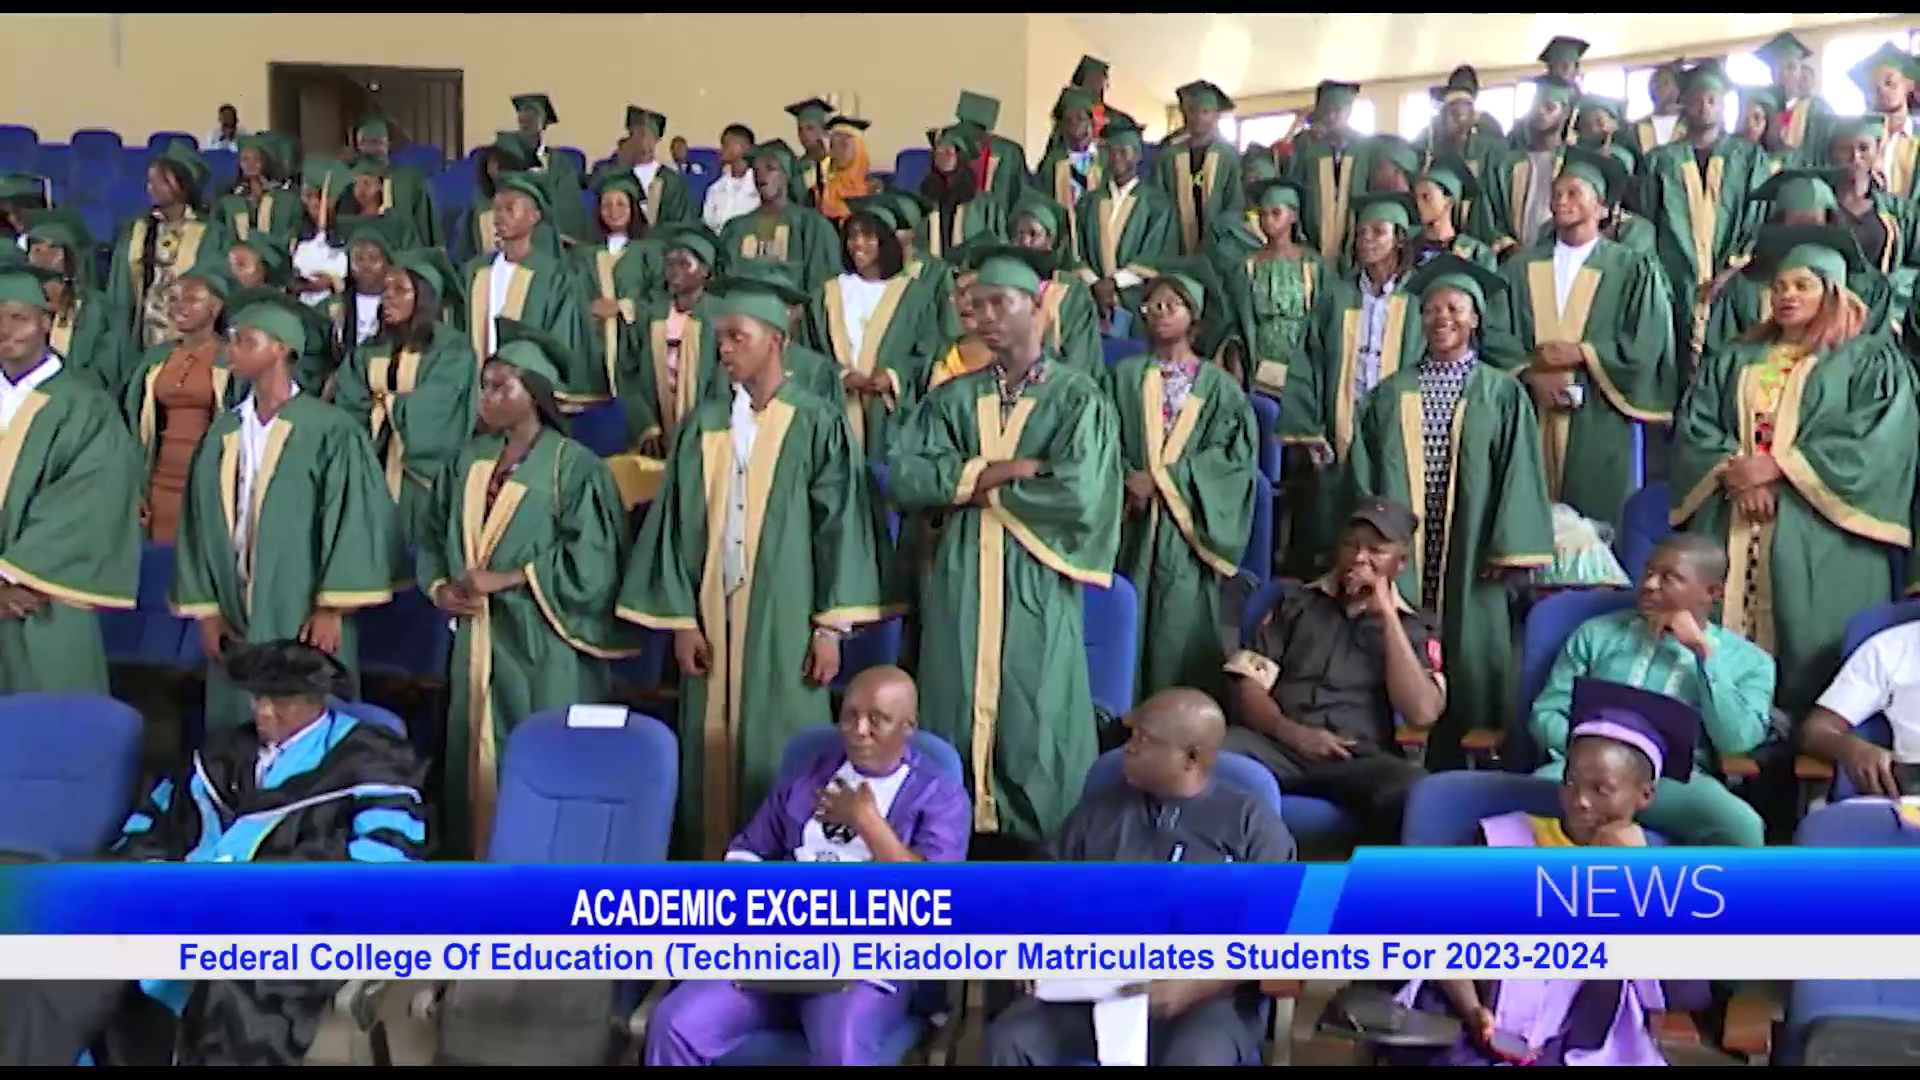 Federal College Of Education (Technical) Ekiadolor Matriculates Students For 2023-2024